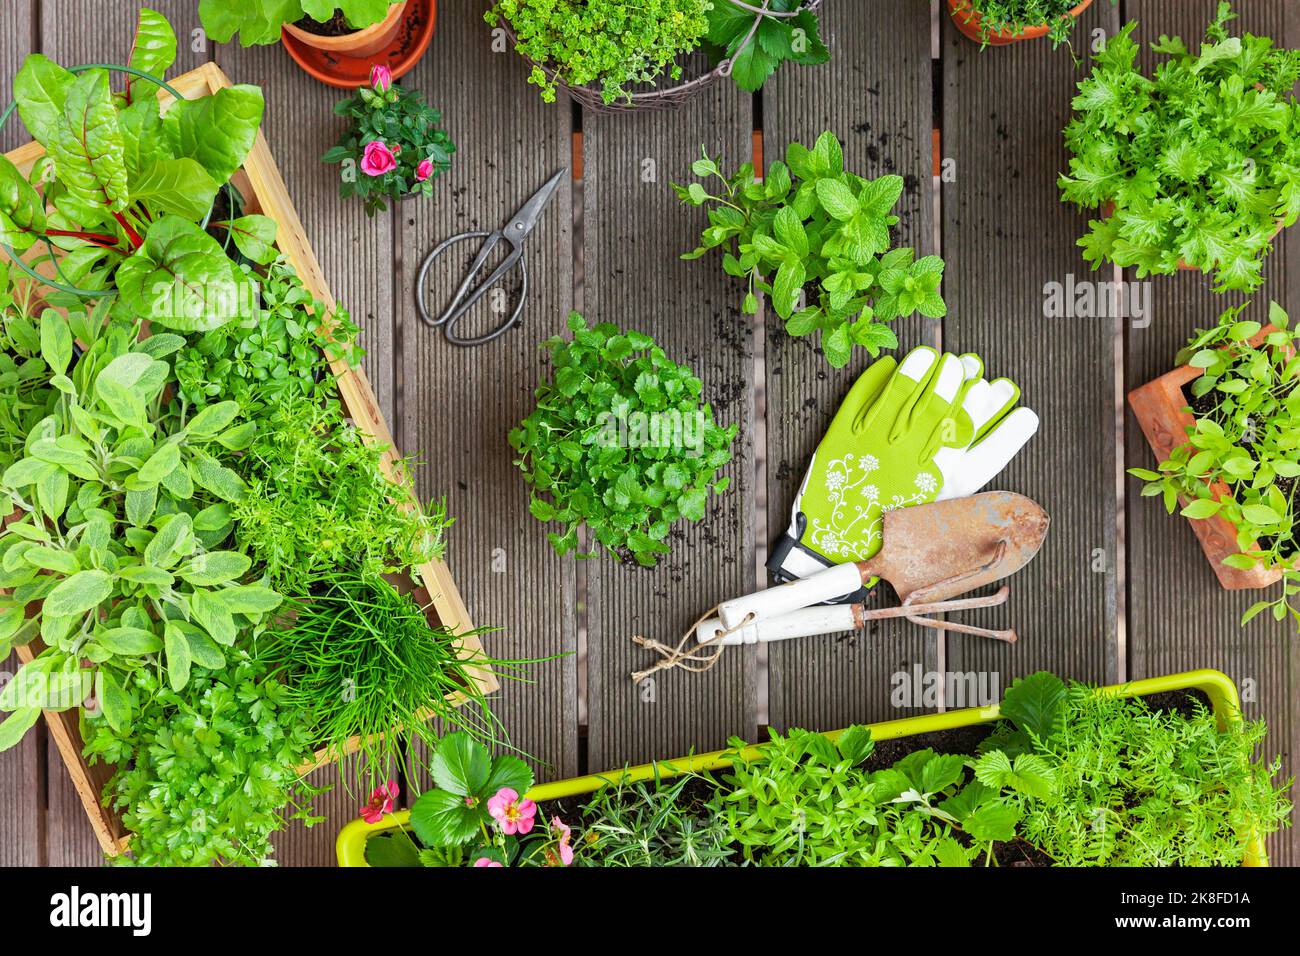 Various summer herbs cultivated in balcony garden Stock Photo